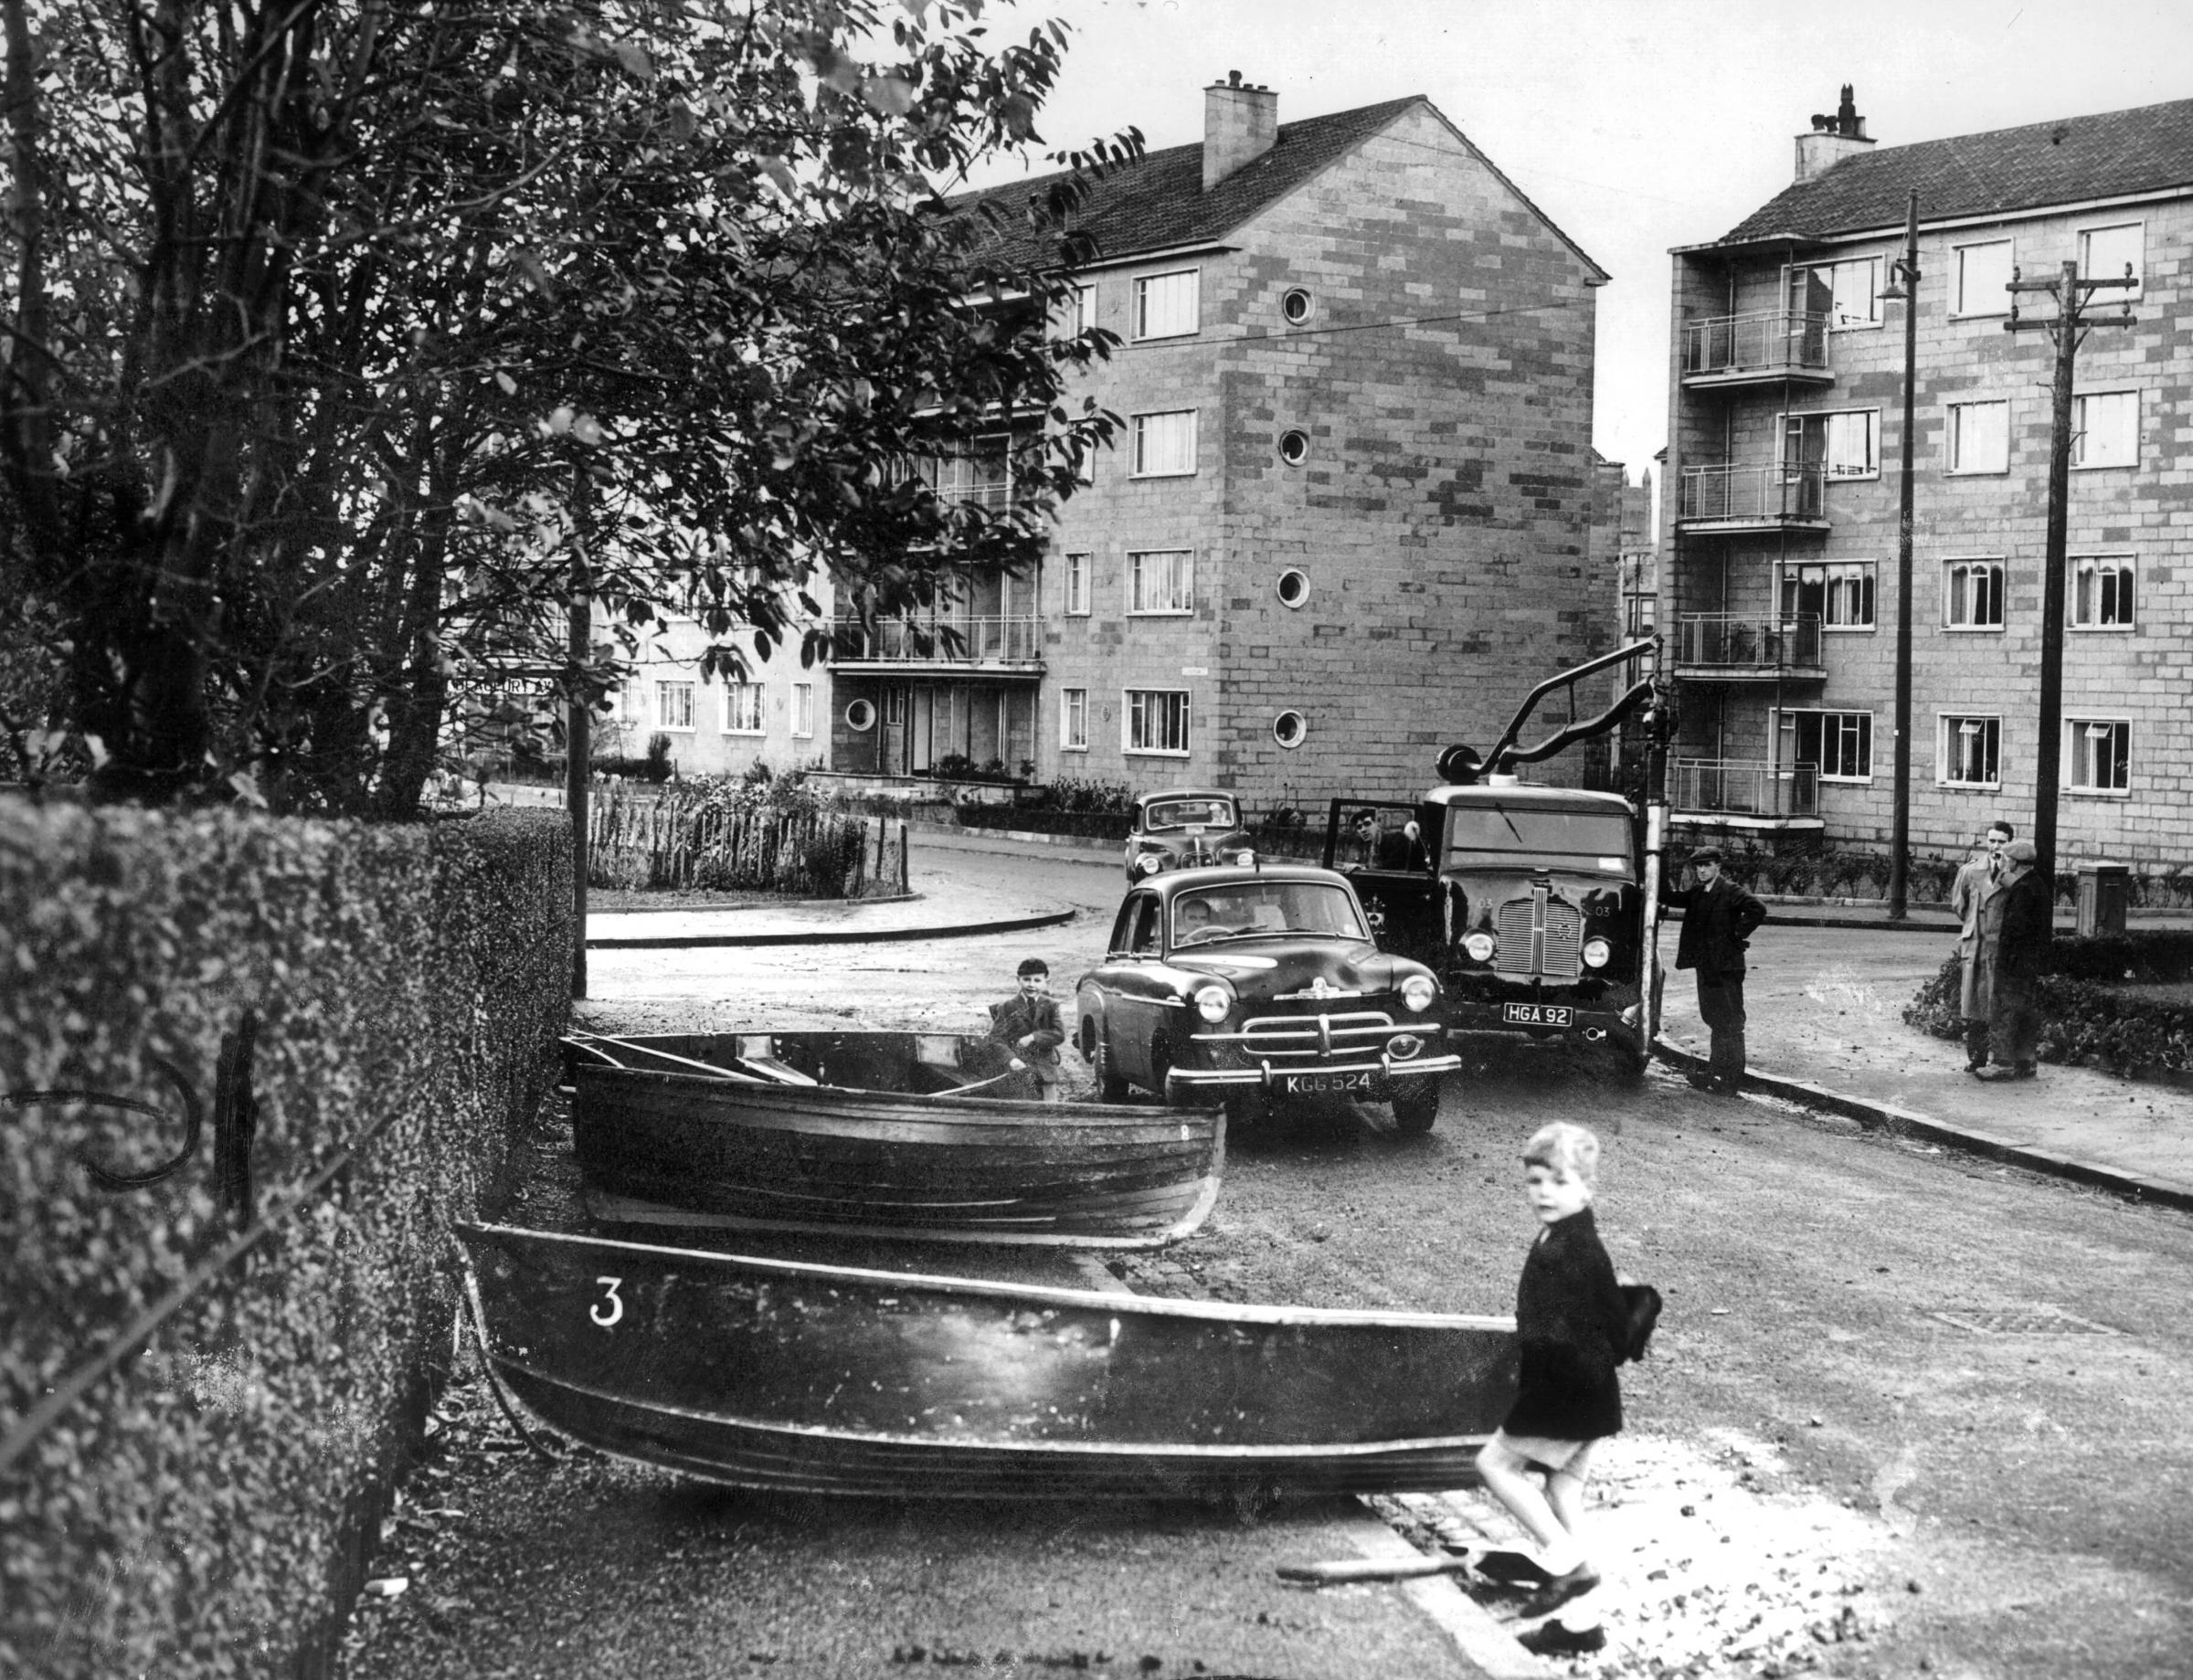 Flooding at Nether Auldhouse in 1954 meant boats had to be used to ferry residents to safety. Pic: Herald and Times